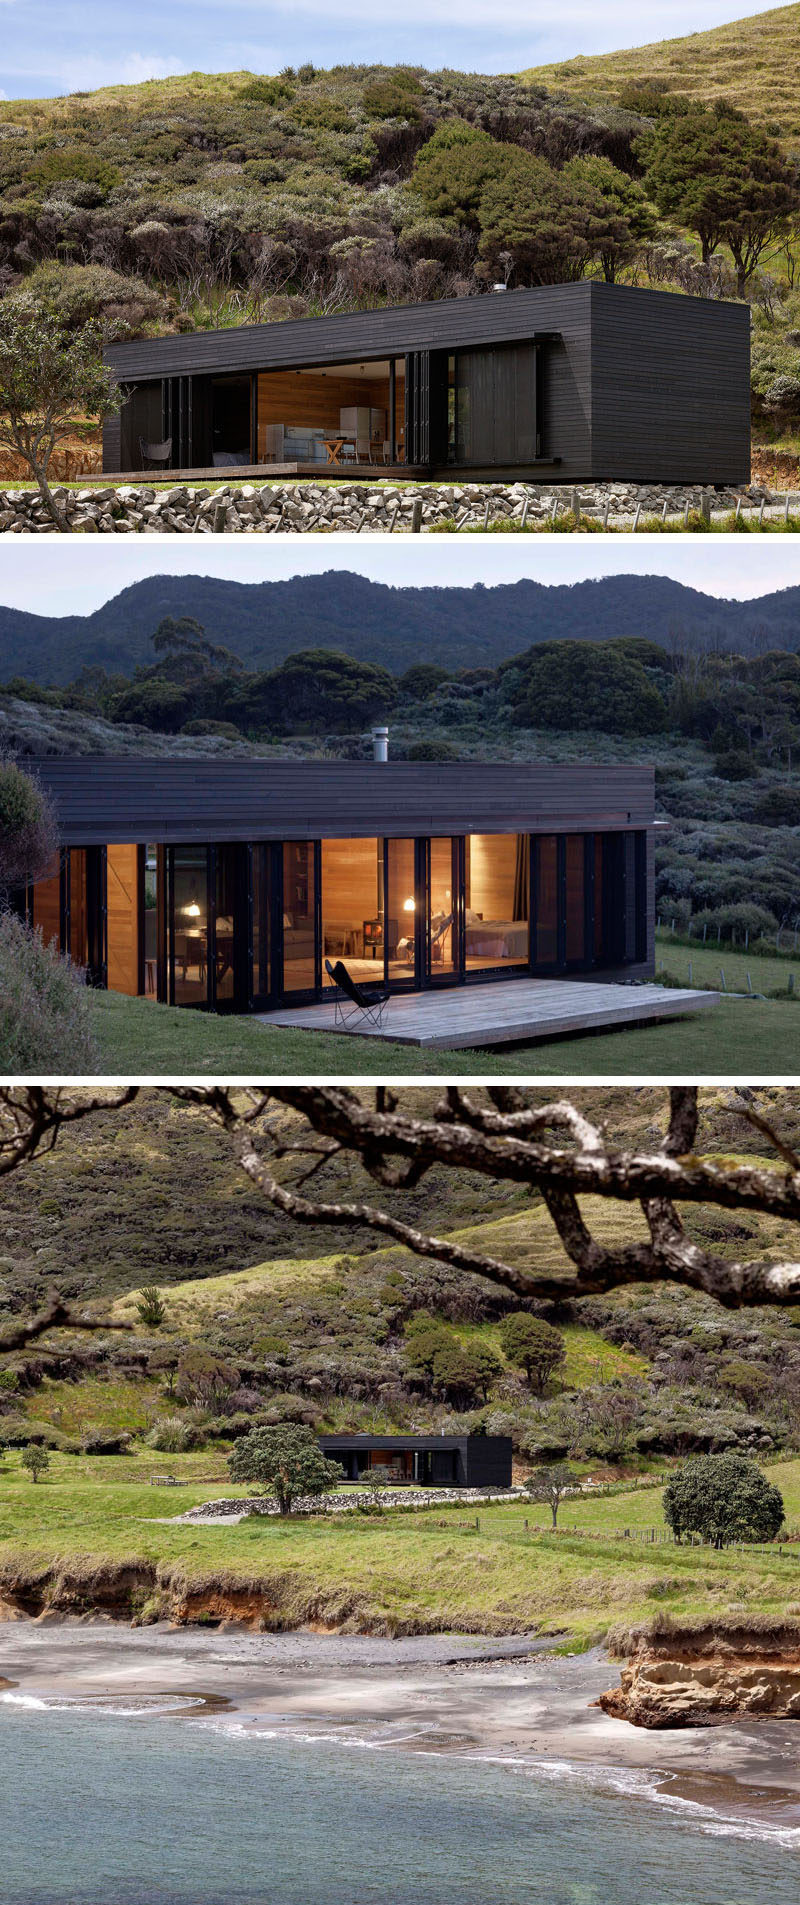 13 Totally Secluded Homes To Escape From The World // The Storm Cottage by Fearon Hay Architects has been designed to be completely off the grid. Located in a remote location on Great Barrier Island in New Zealand, this secluded place would be great for a rejuvenating retreat.